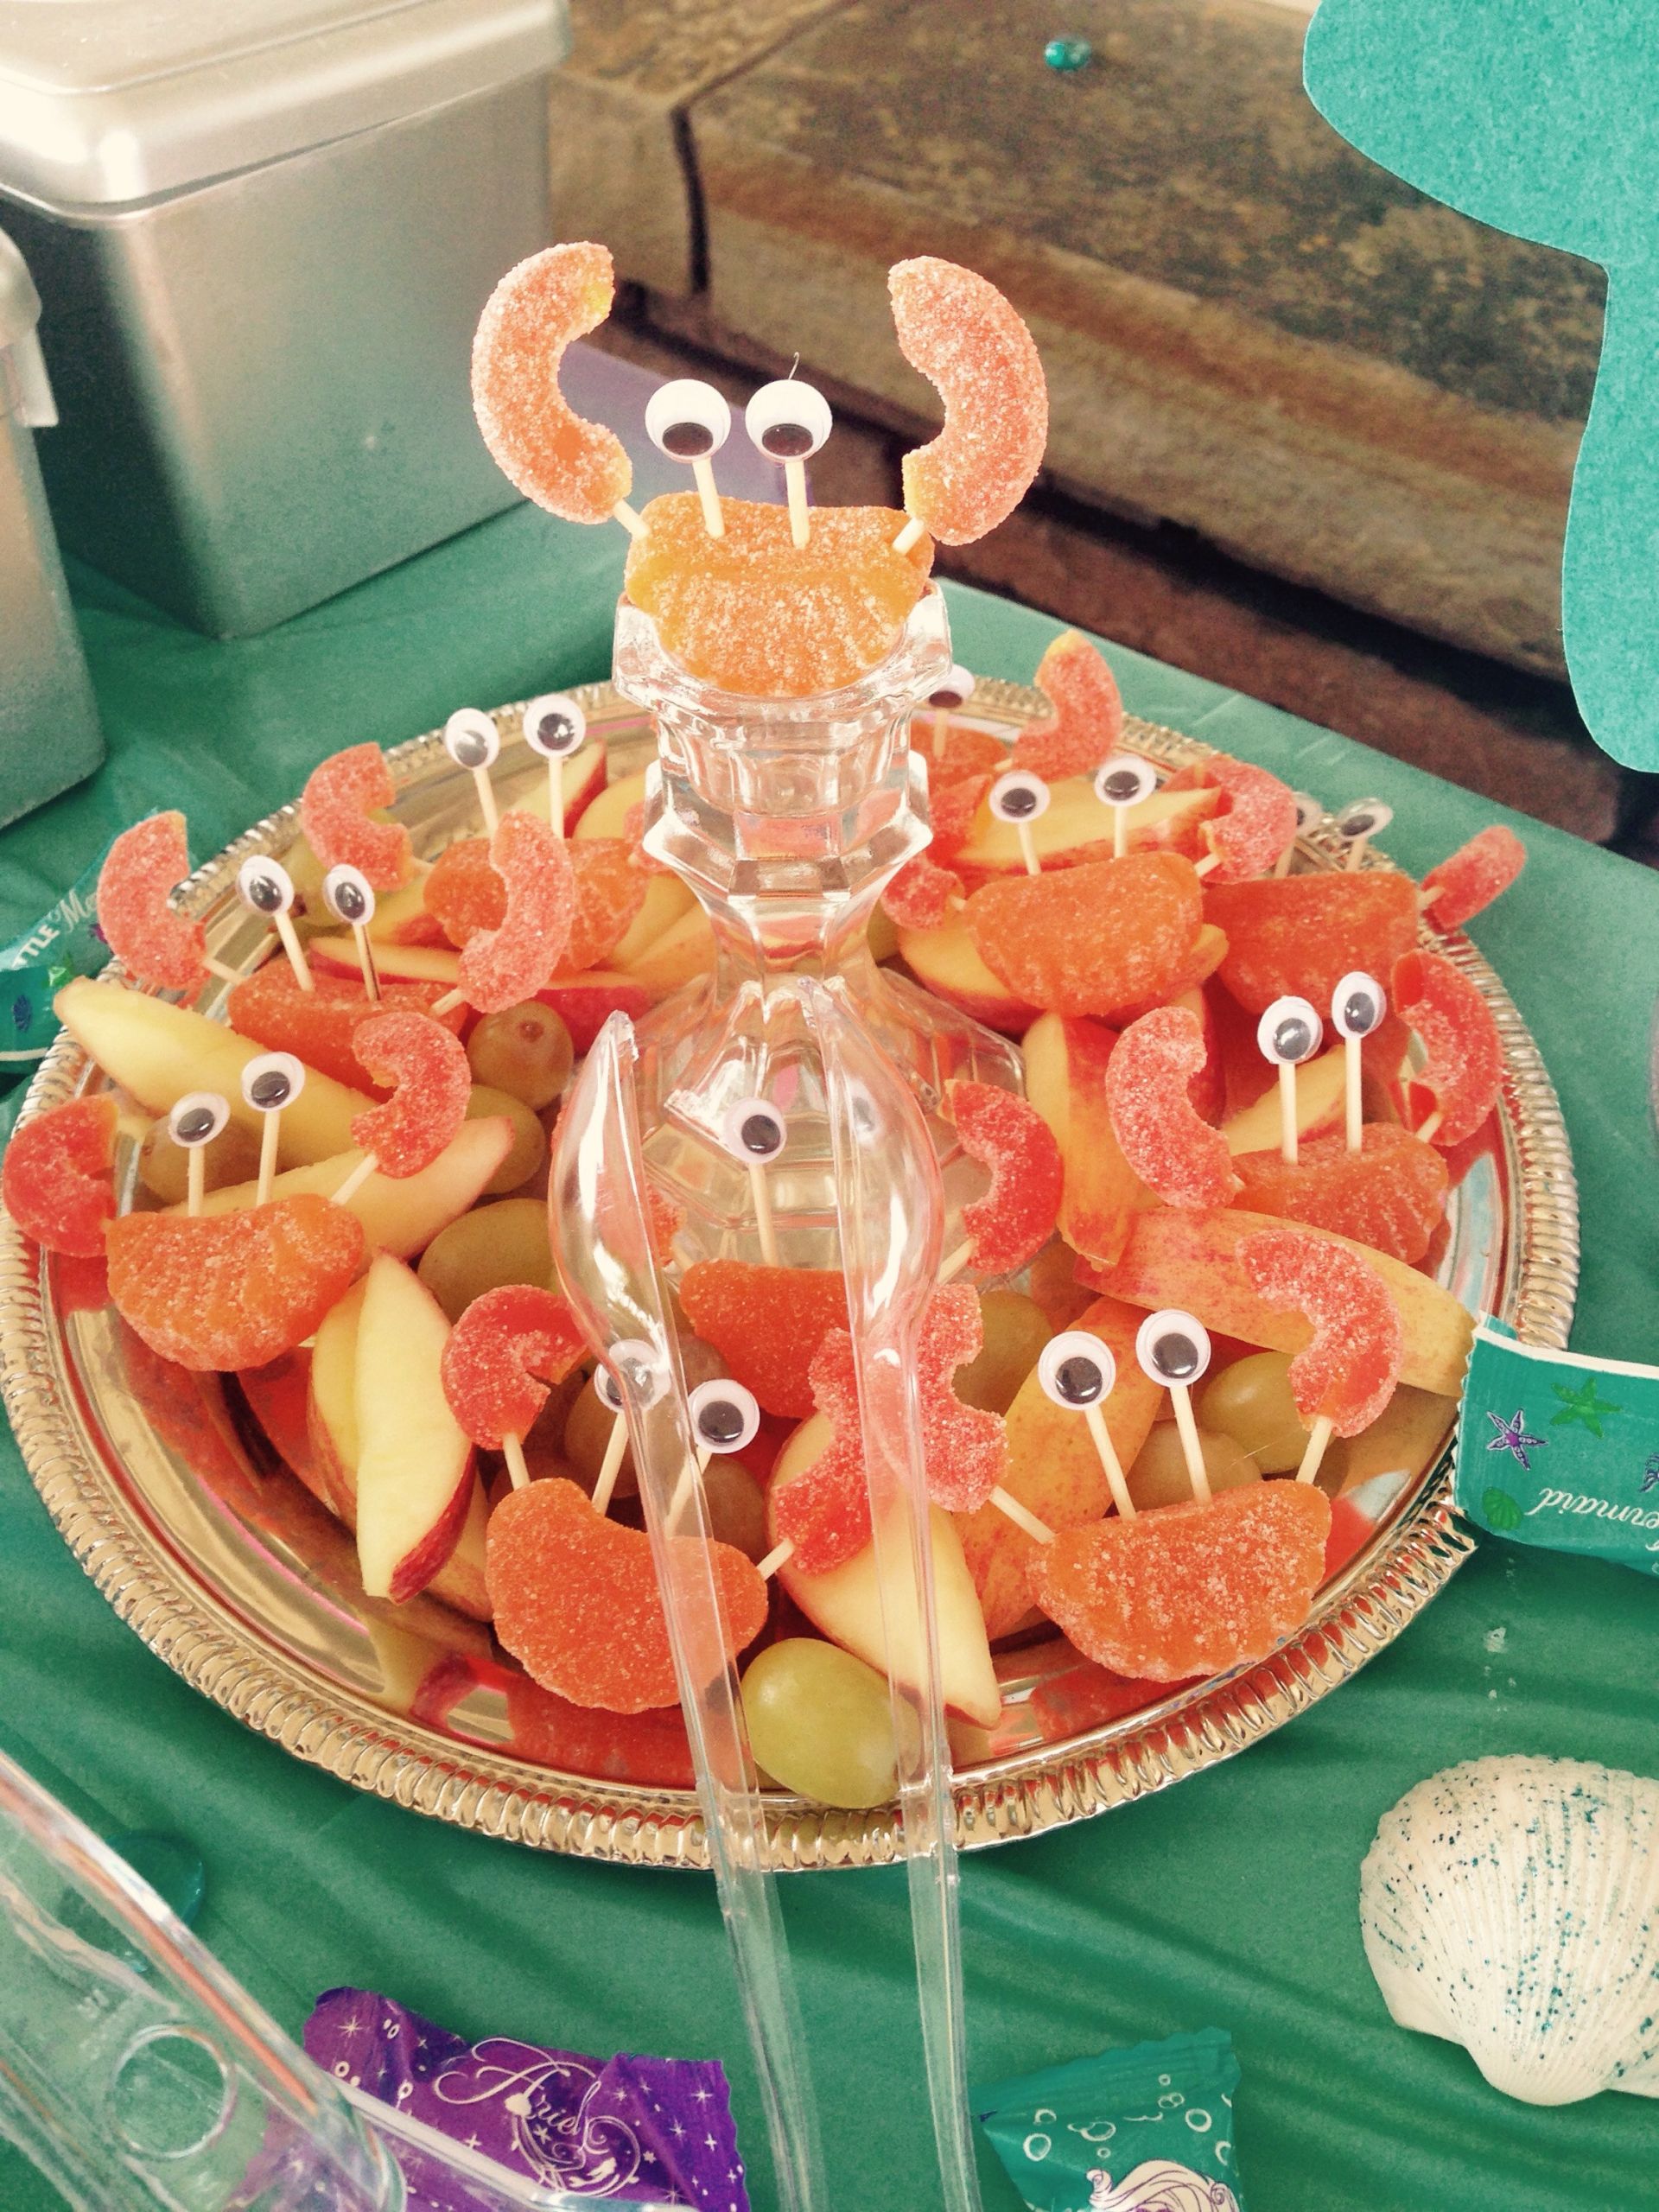 The Little Mermaid Party Food Ideas
 The Little Mermaid themed Birthday Party